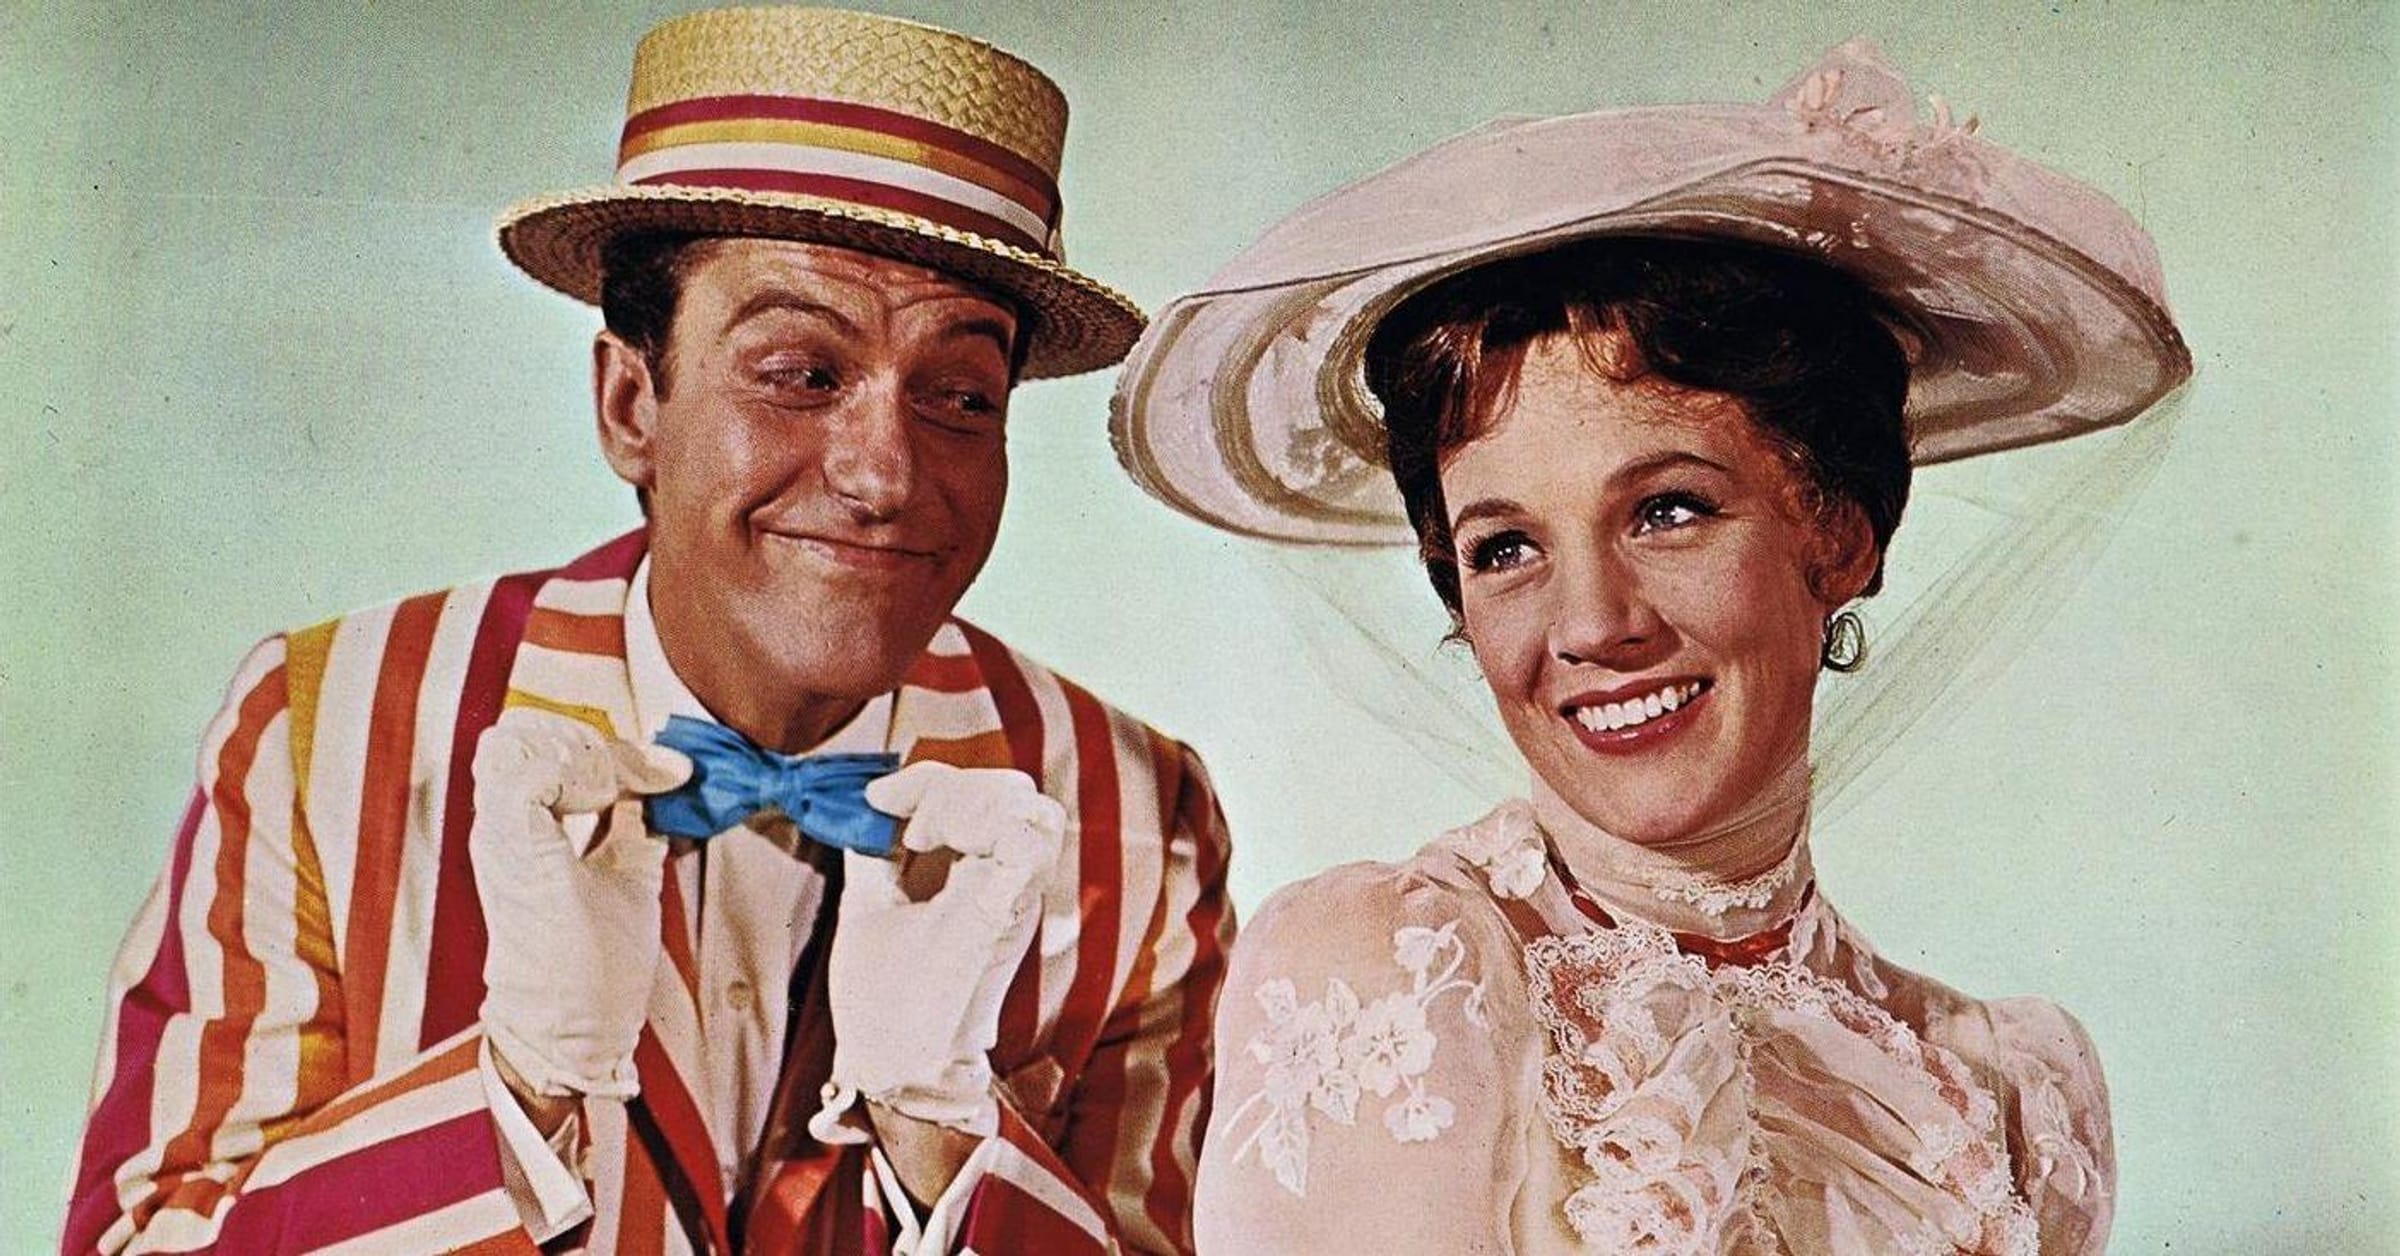 https://imgix.ranker.com/list_img_v2/10065/2750065/original/behind-the-scenes-of-mary-poppins?fit=crop&fm=pjpg&q=80&dpr=2&w=1200&h=720